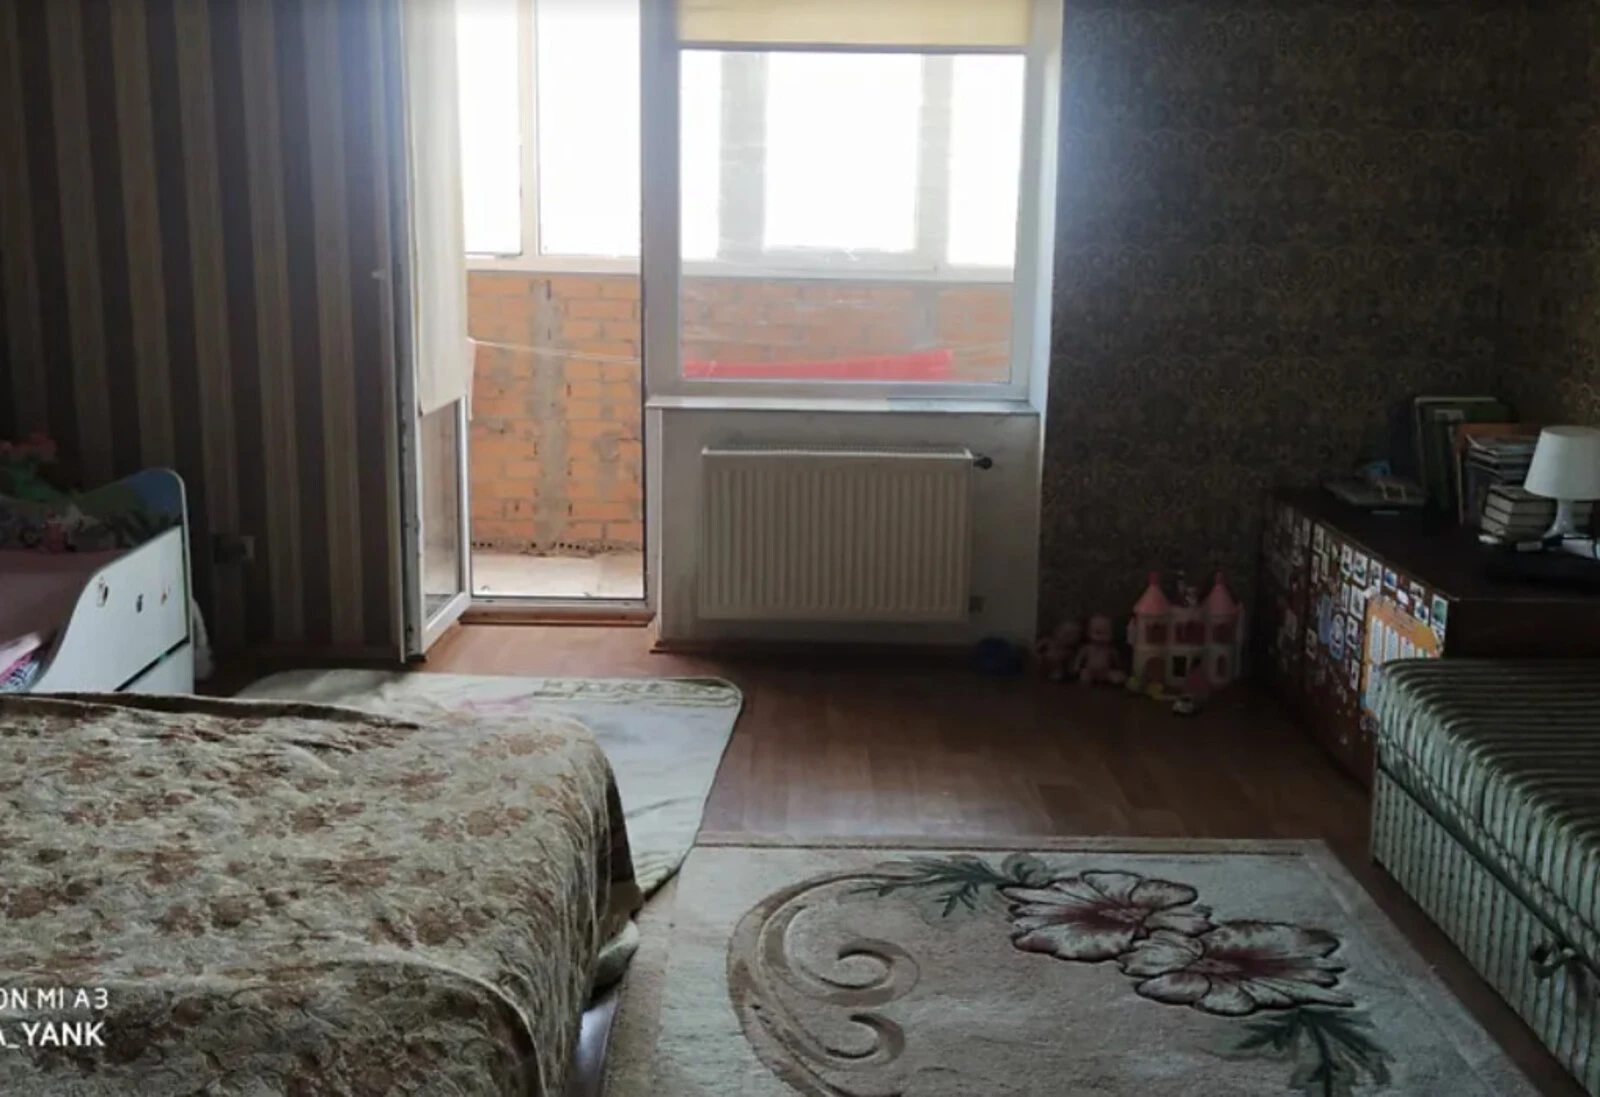 Apartments for sale. 5 rooms, 144 m², 10th floor/11 floors. Troleybusna vul., Ternopil. 